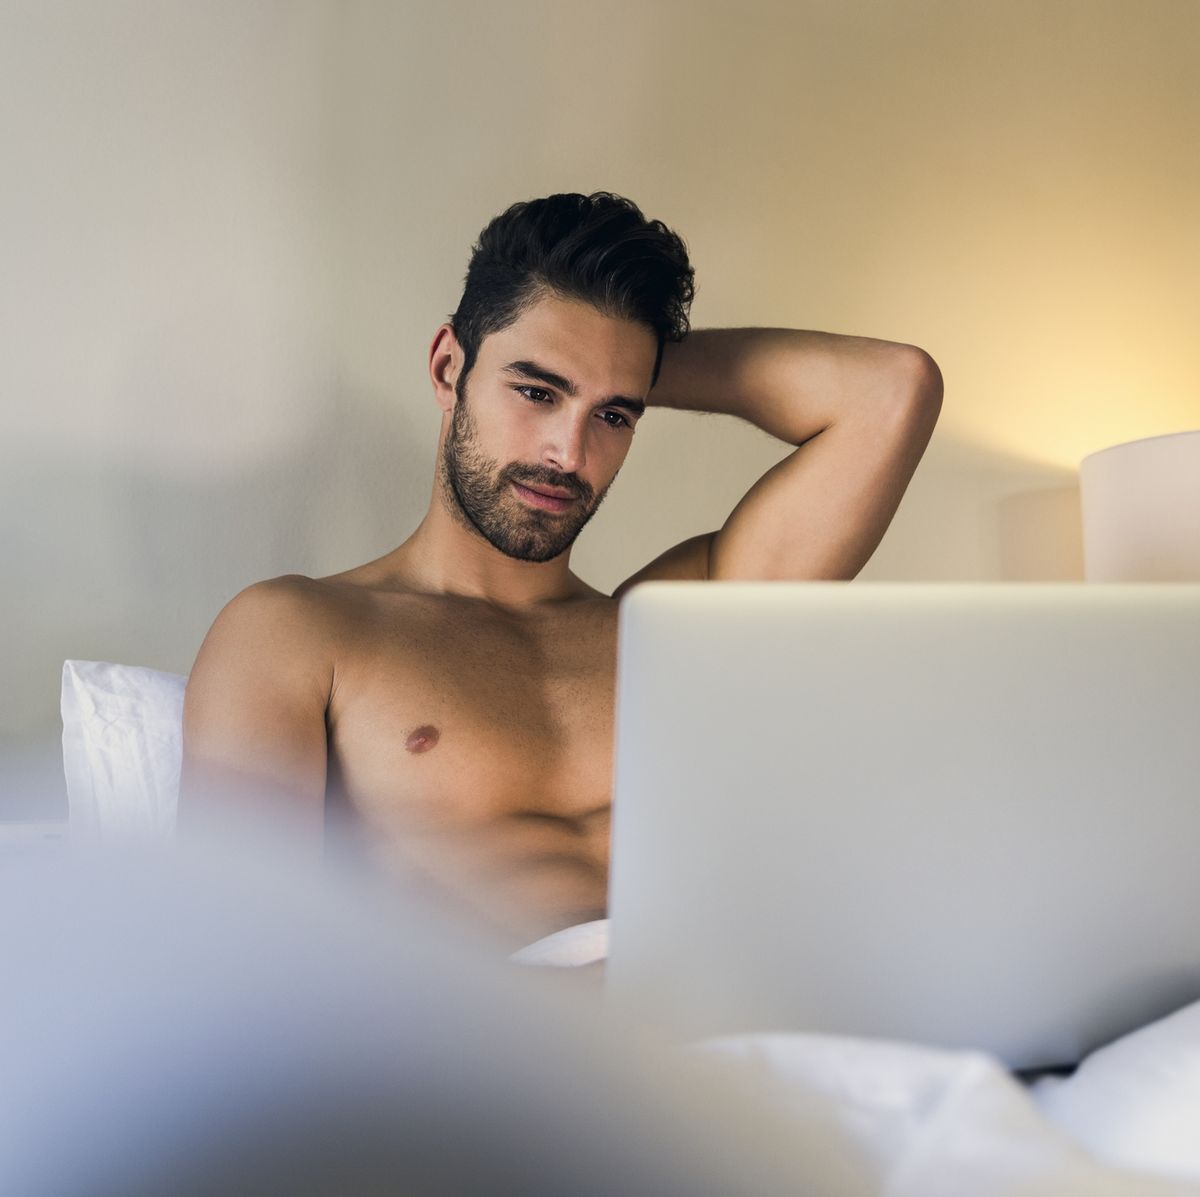 Old Wife Boy Xxx Hq Video - How to Browse Porn Sites Safely Without Getting Hacked